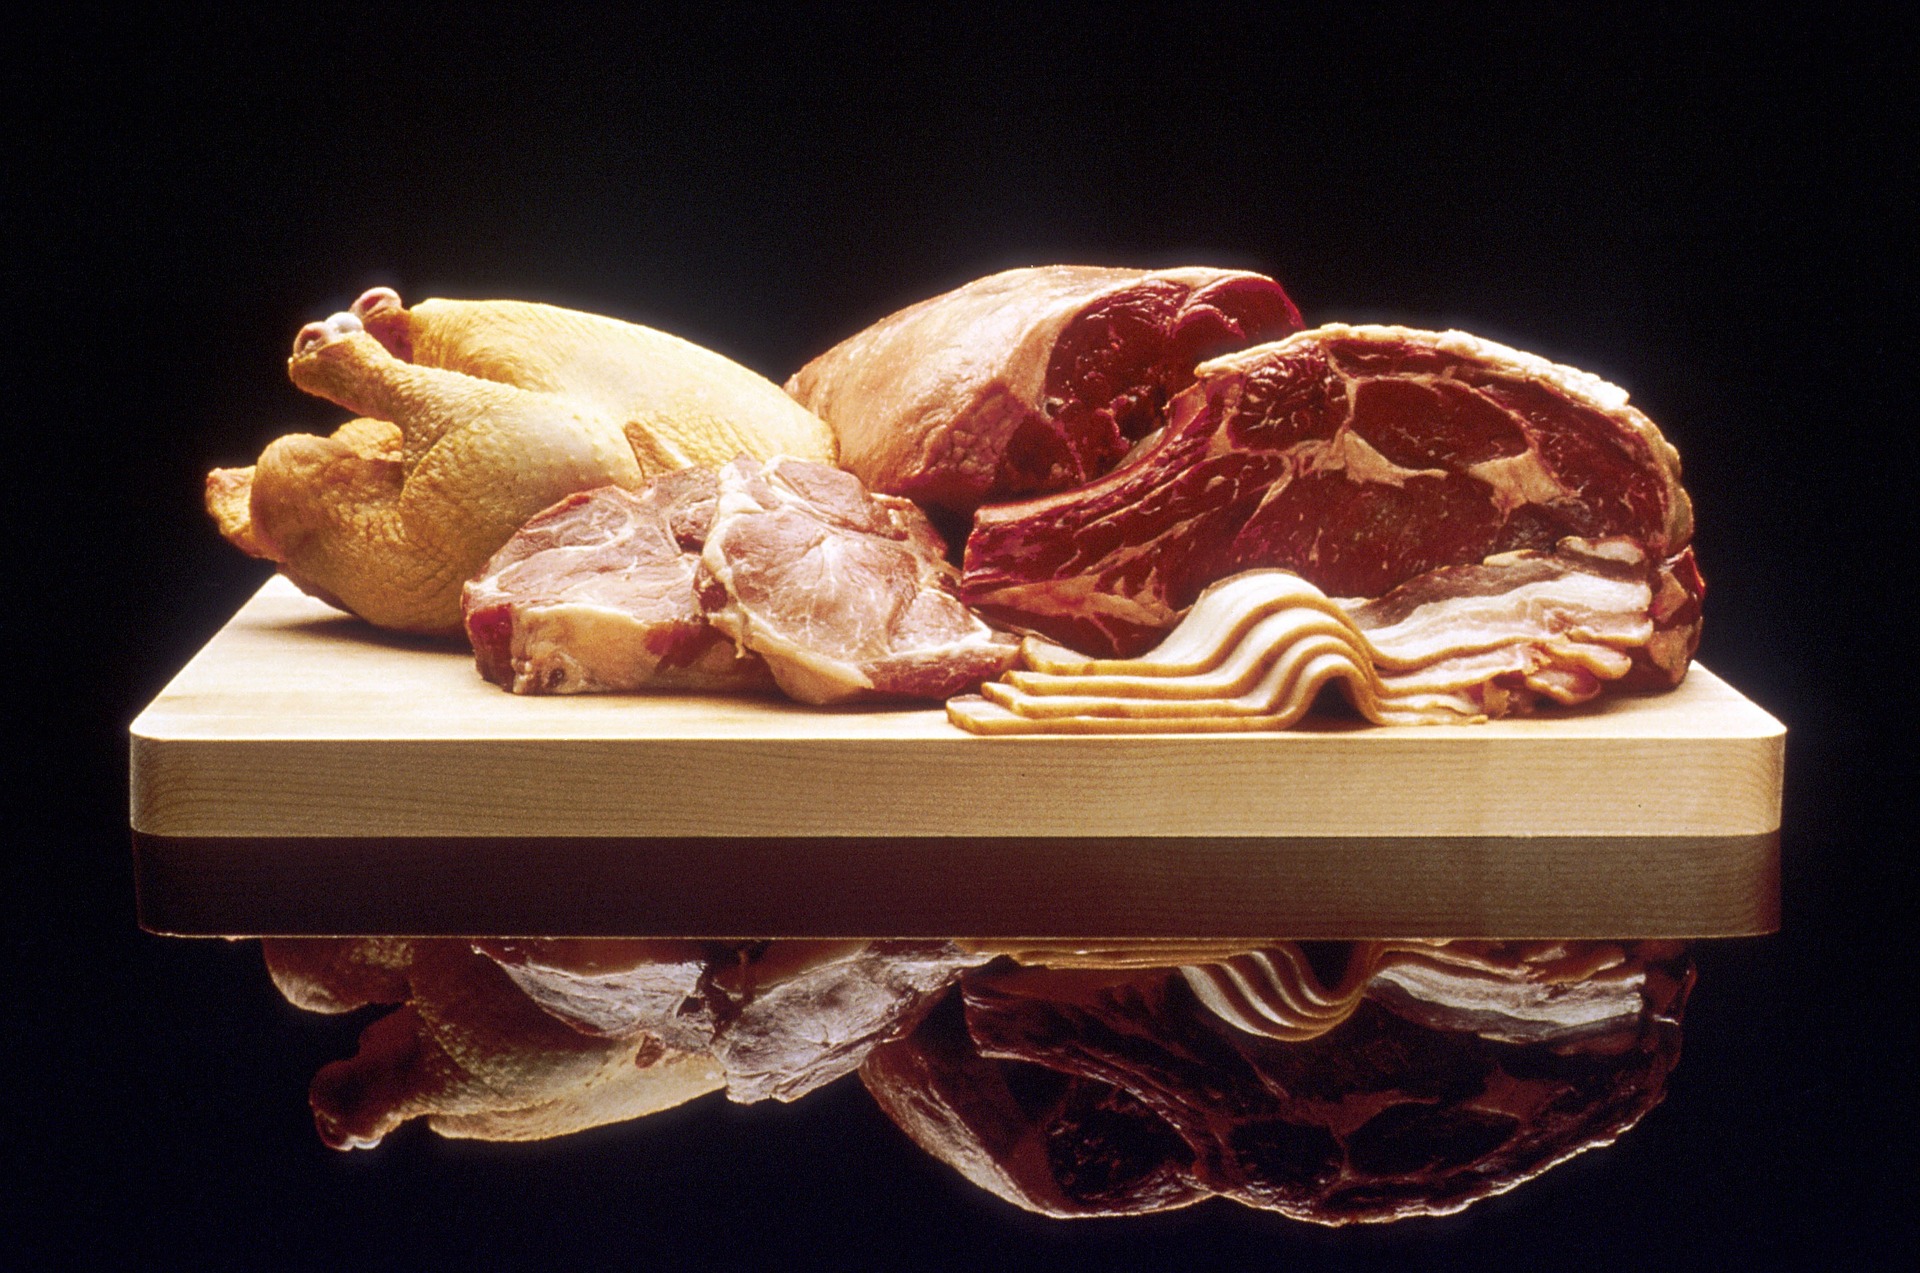 Just like red meat, white meat can also increase bad cholesterol